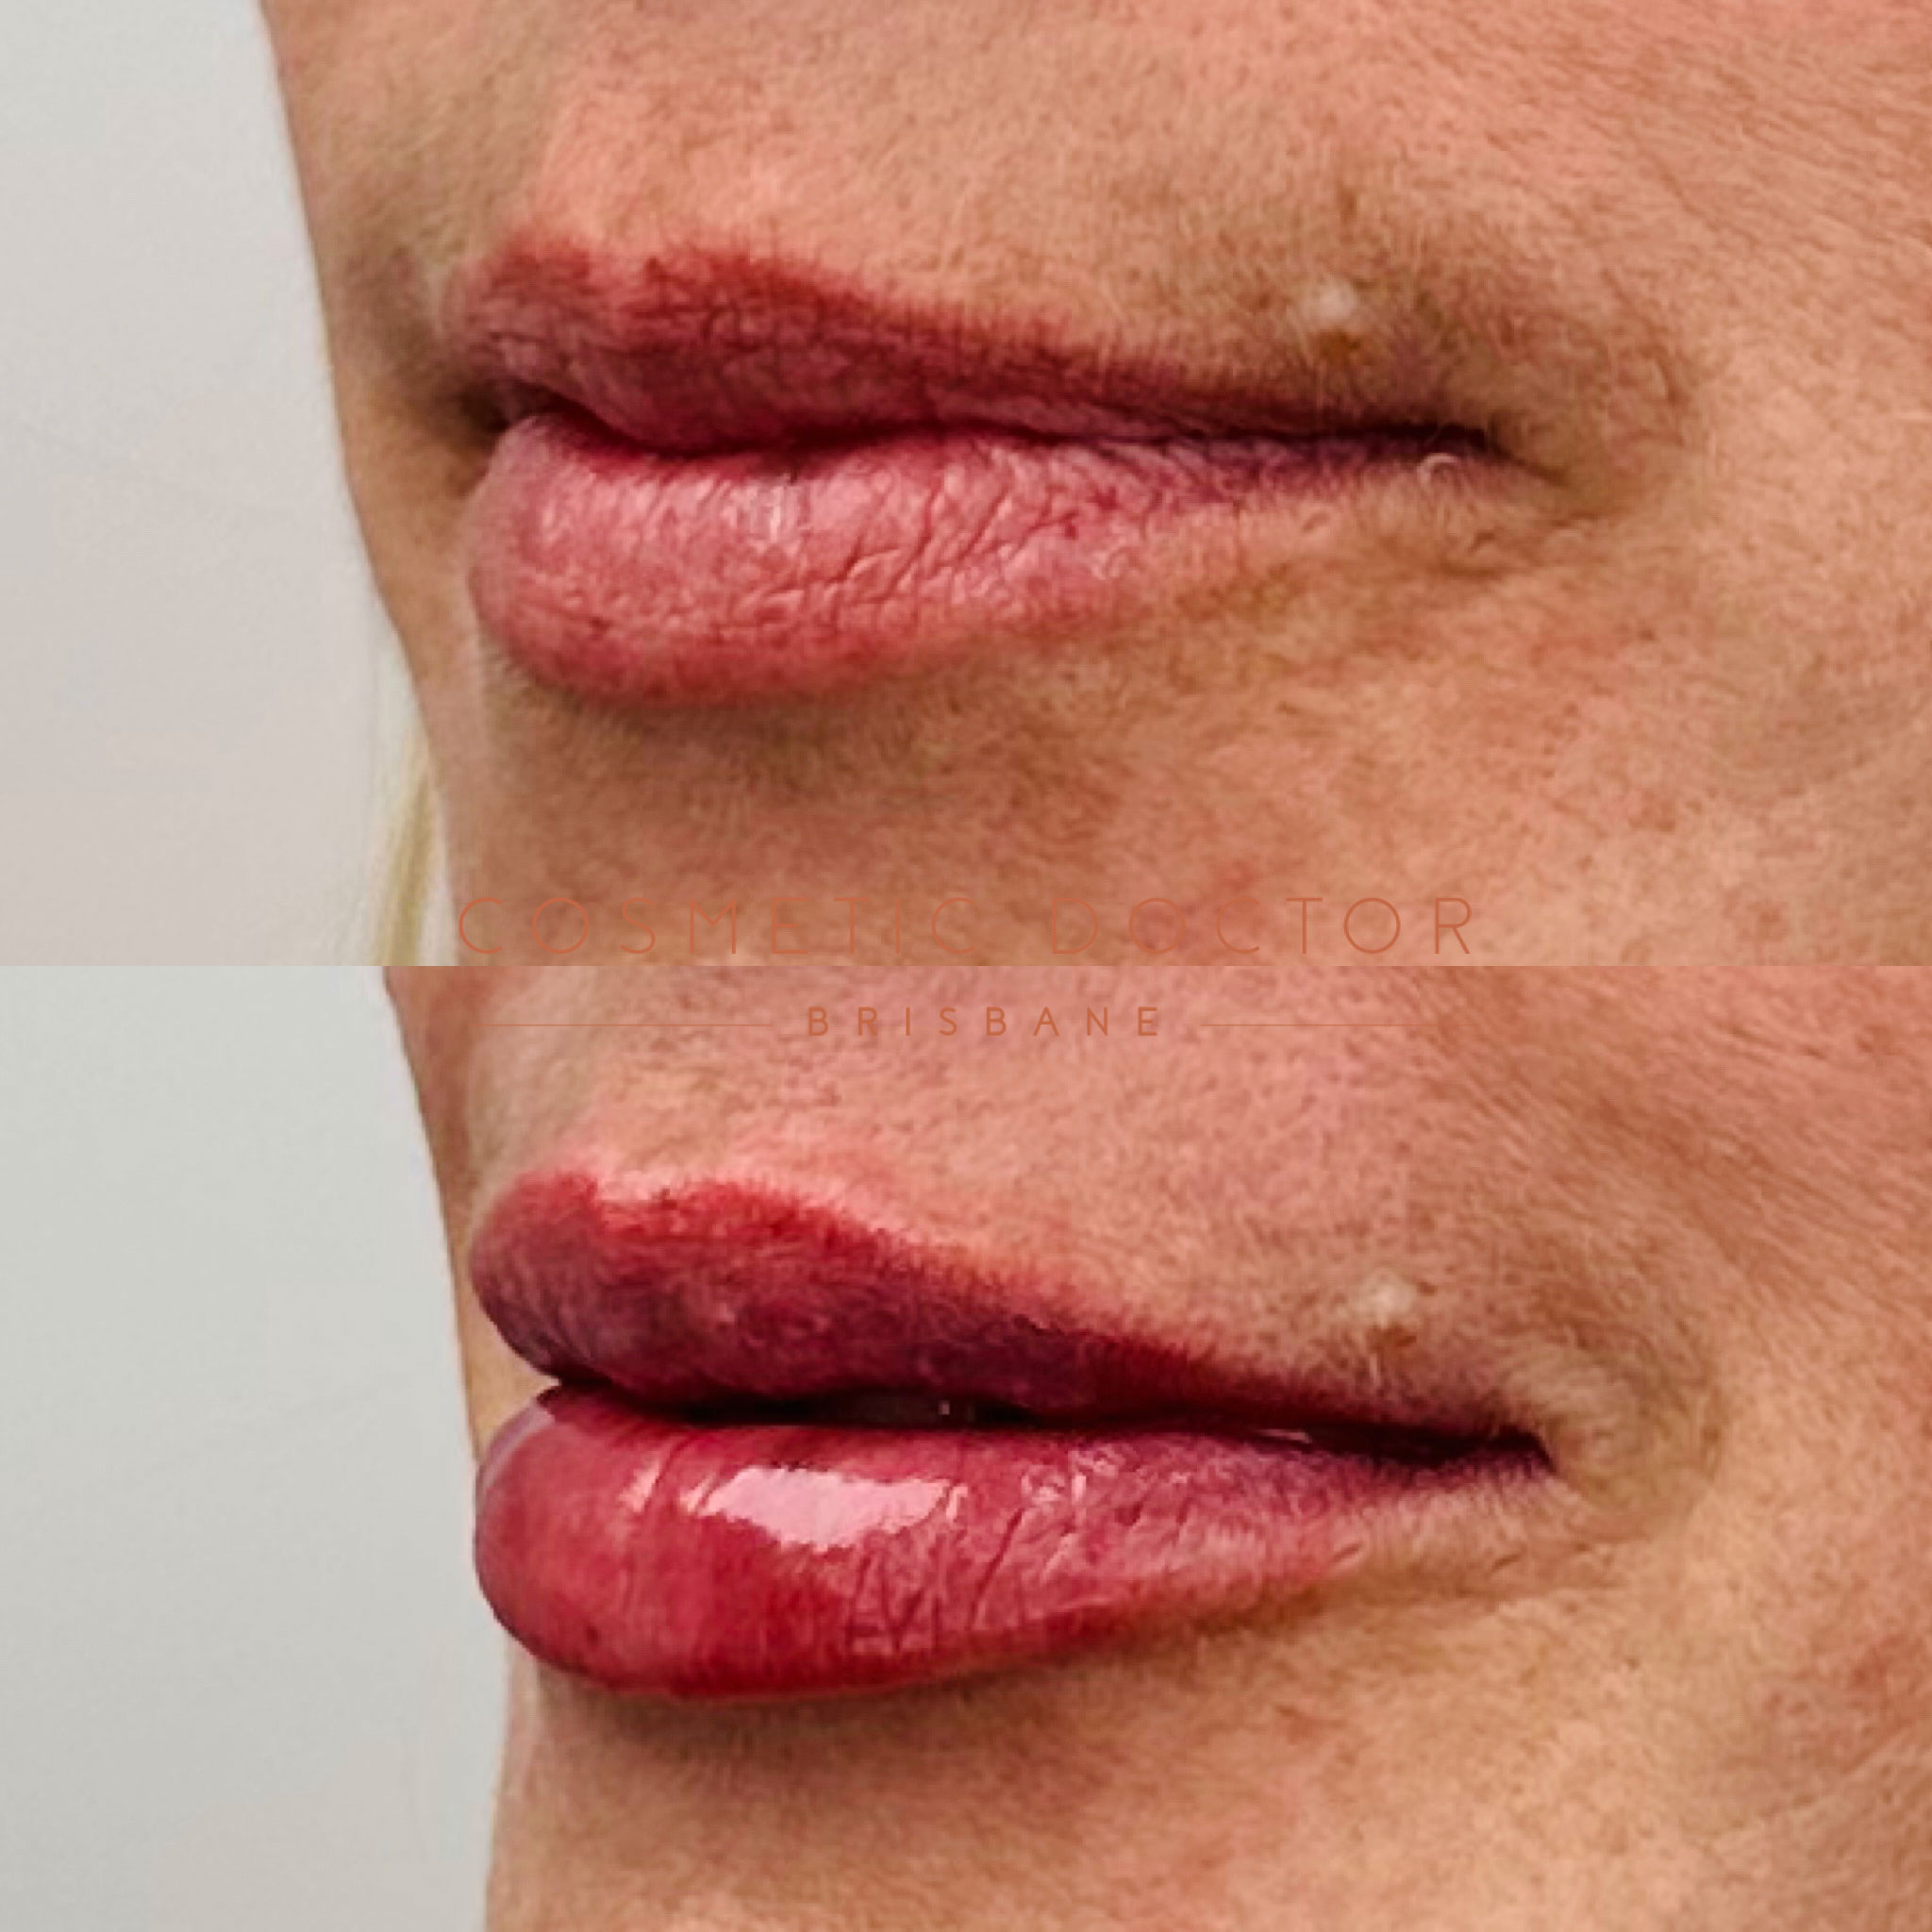 Before and after of dermal lip filler performed by Dr Tarek Shalabi at cosmetic doctor brisbane